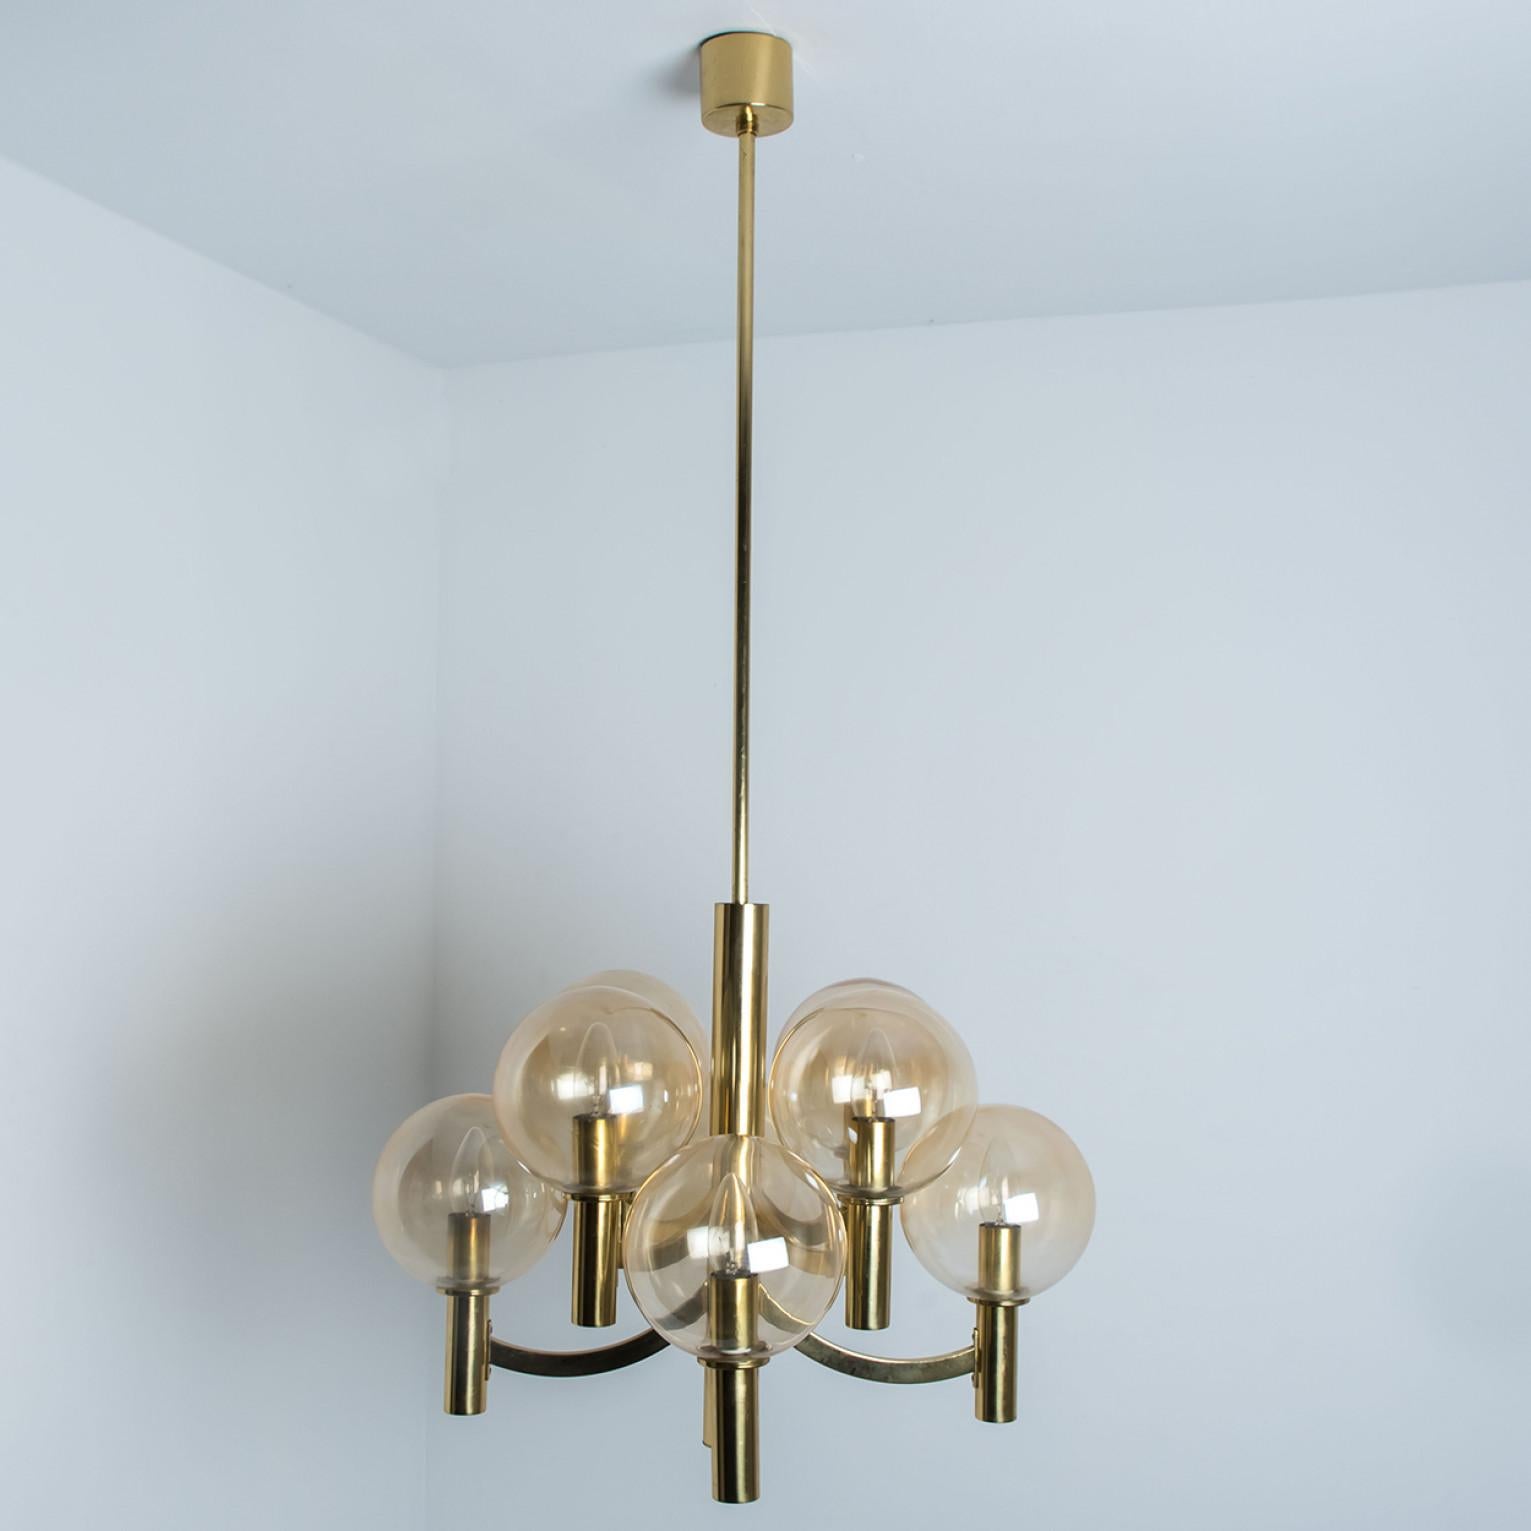 Brass and Clear Glass Chandelier, Jakobsson, 1970s For Sale 2